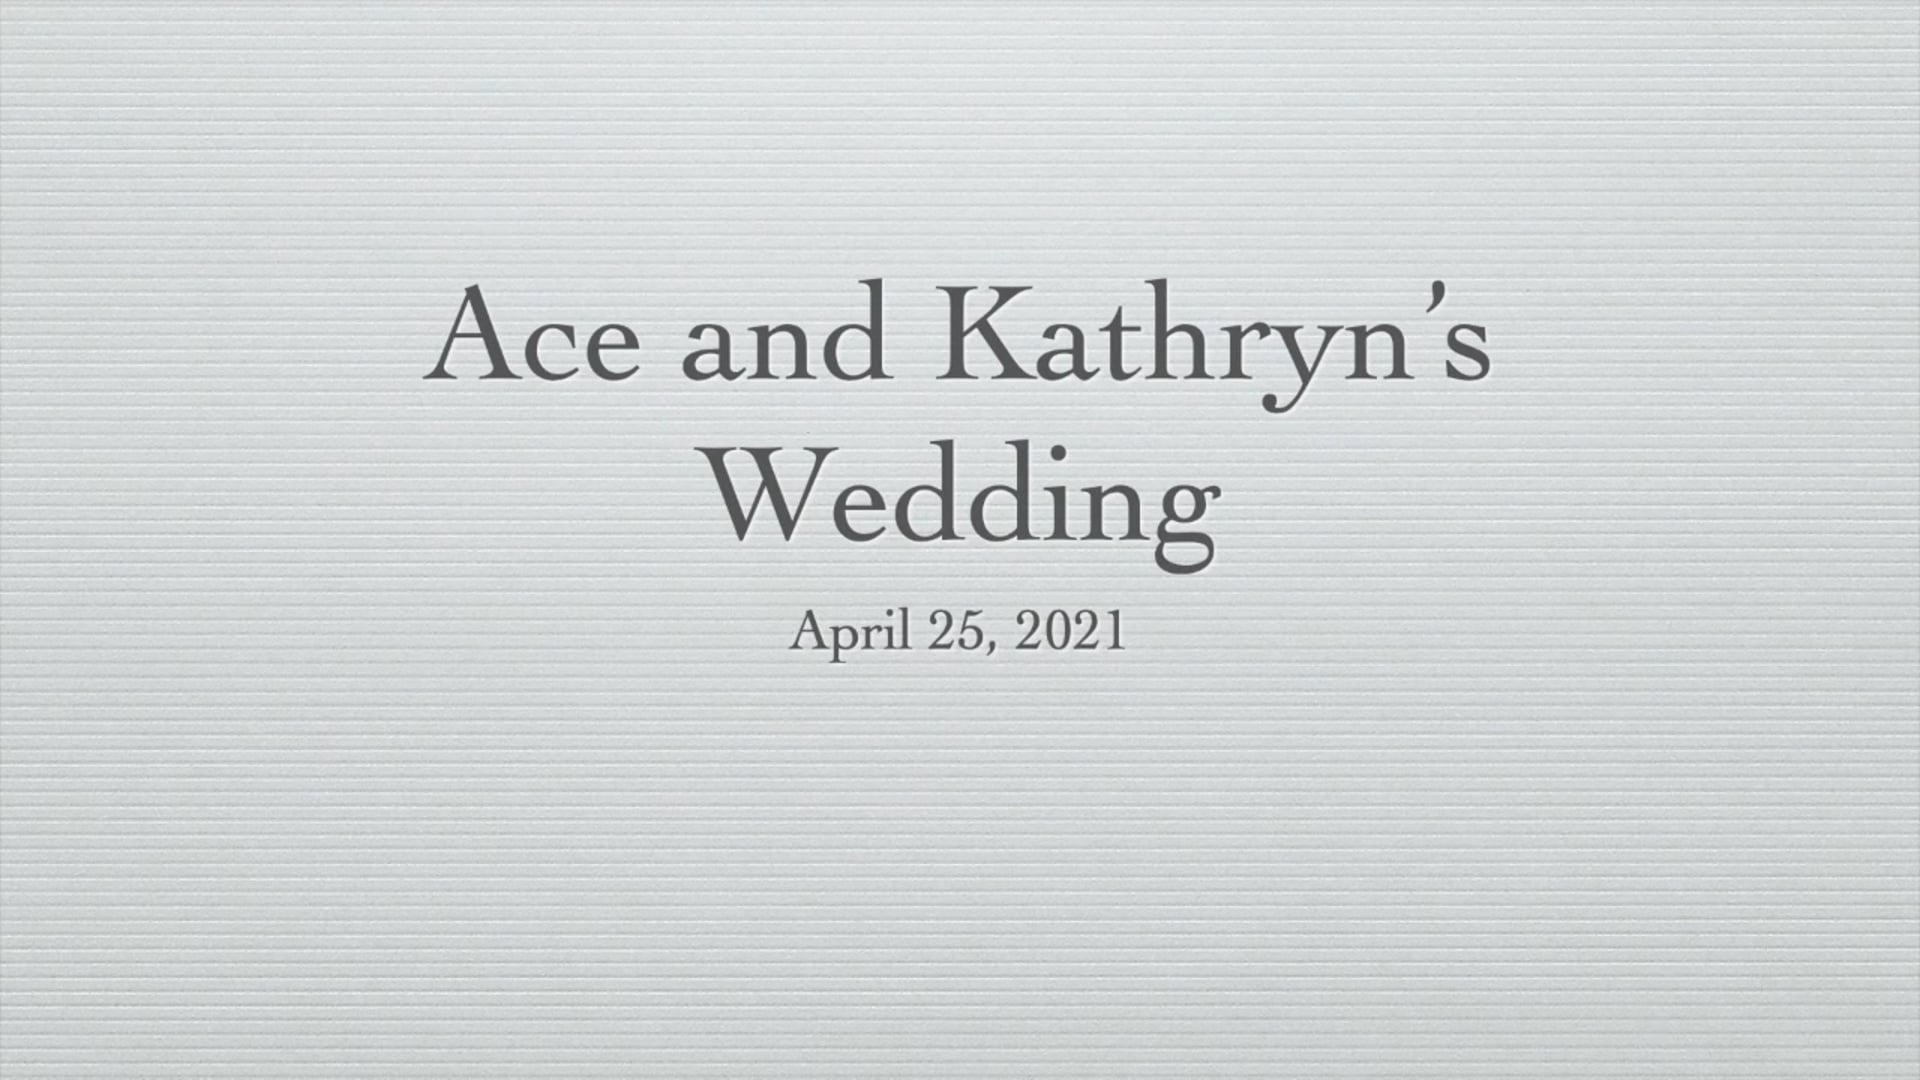 Ace and Kathryn's Wedding